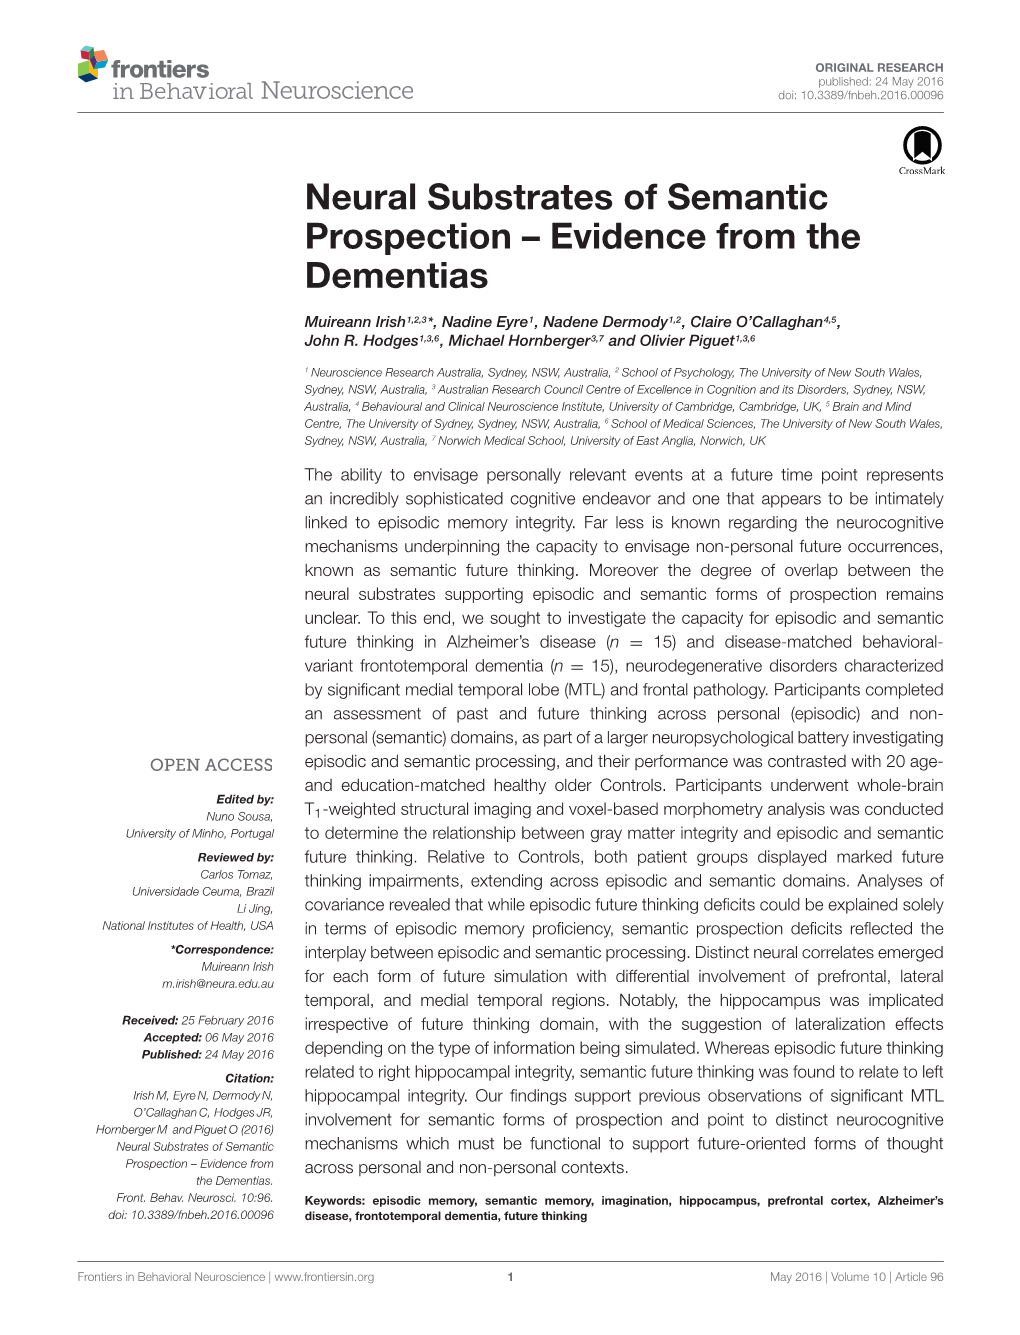 Neural Substrates of Semantic Prospection – Evidence from the Dementias